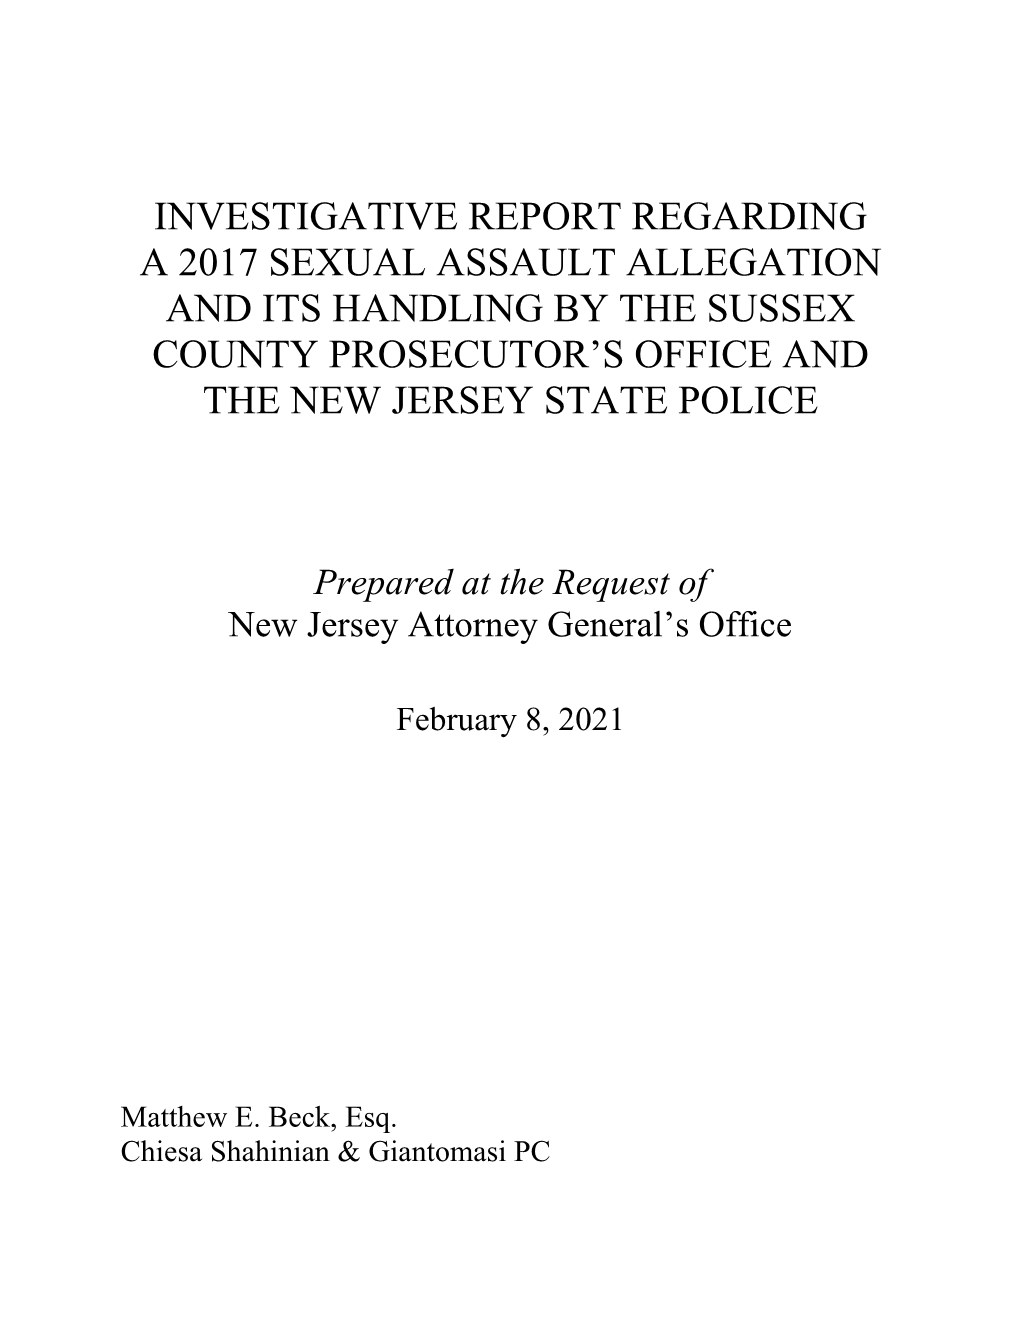 Investigative Report Regarding a 2017 Sexual Assault Allegation and Its Handling by the Sussex County Prosecutor's Office